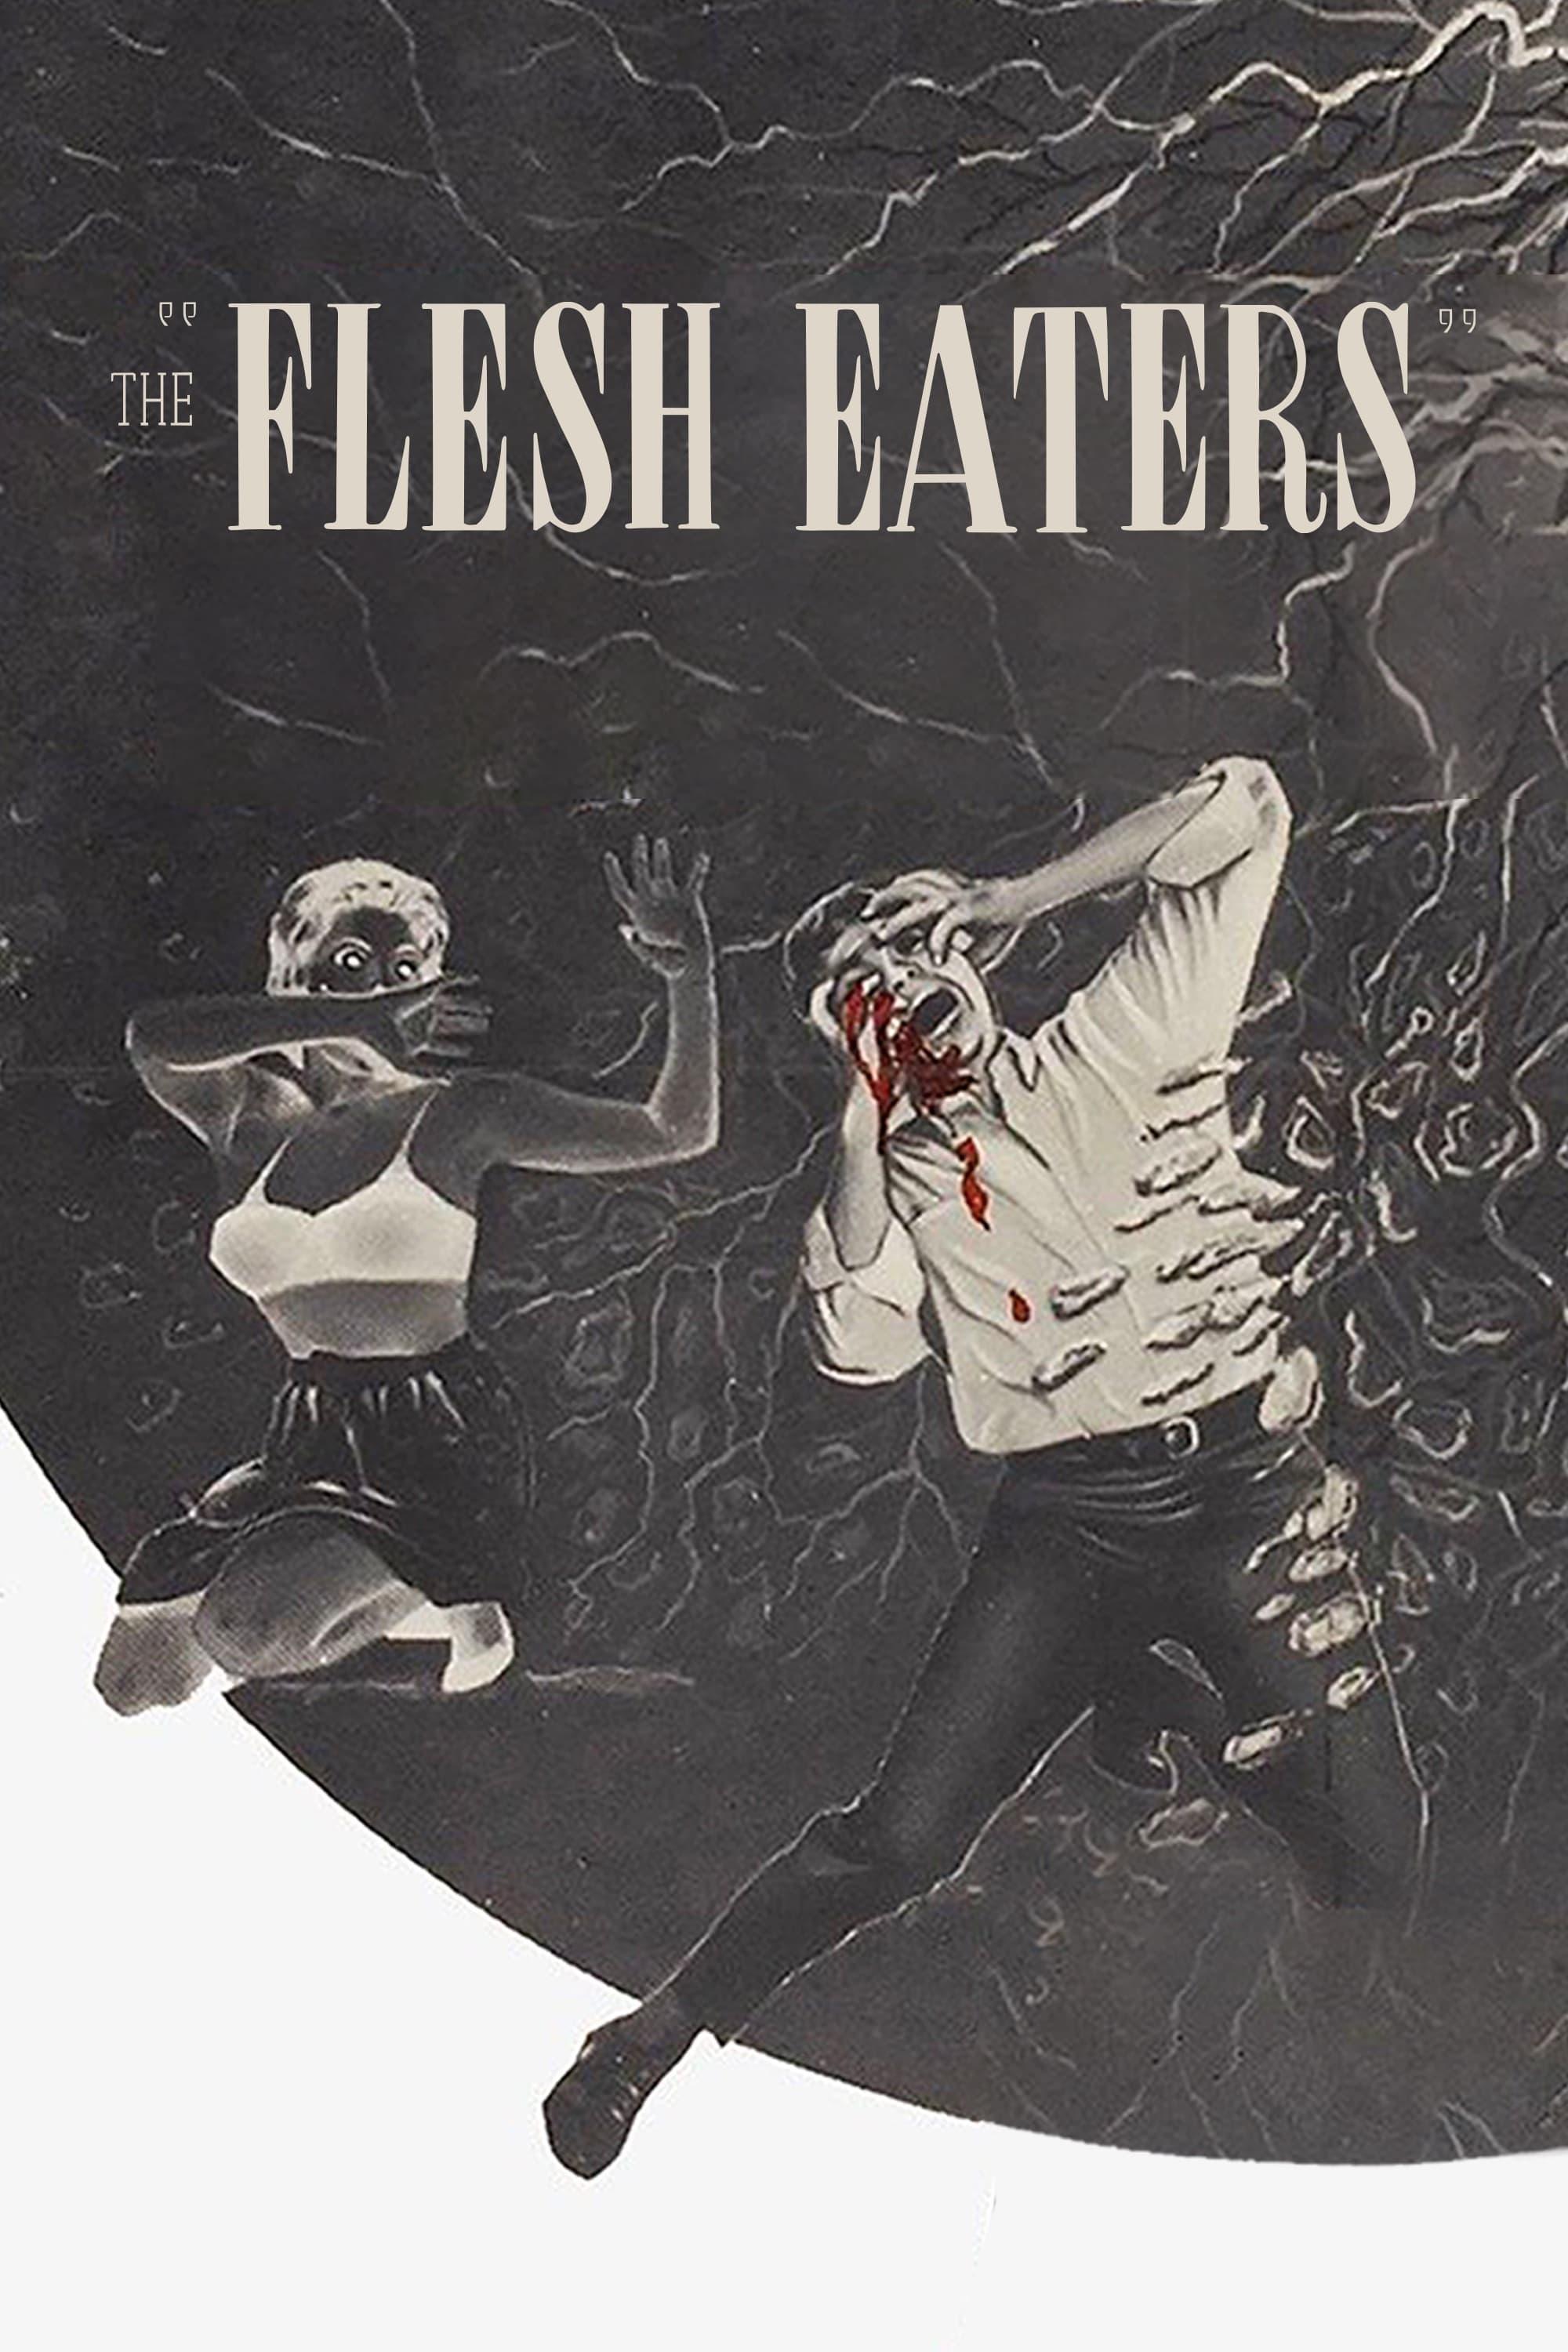 The Flesh Eaters poster